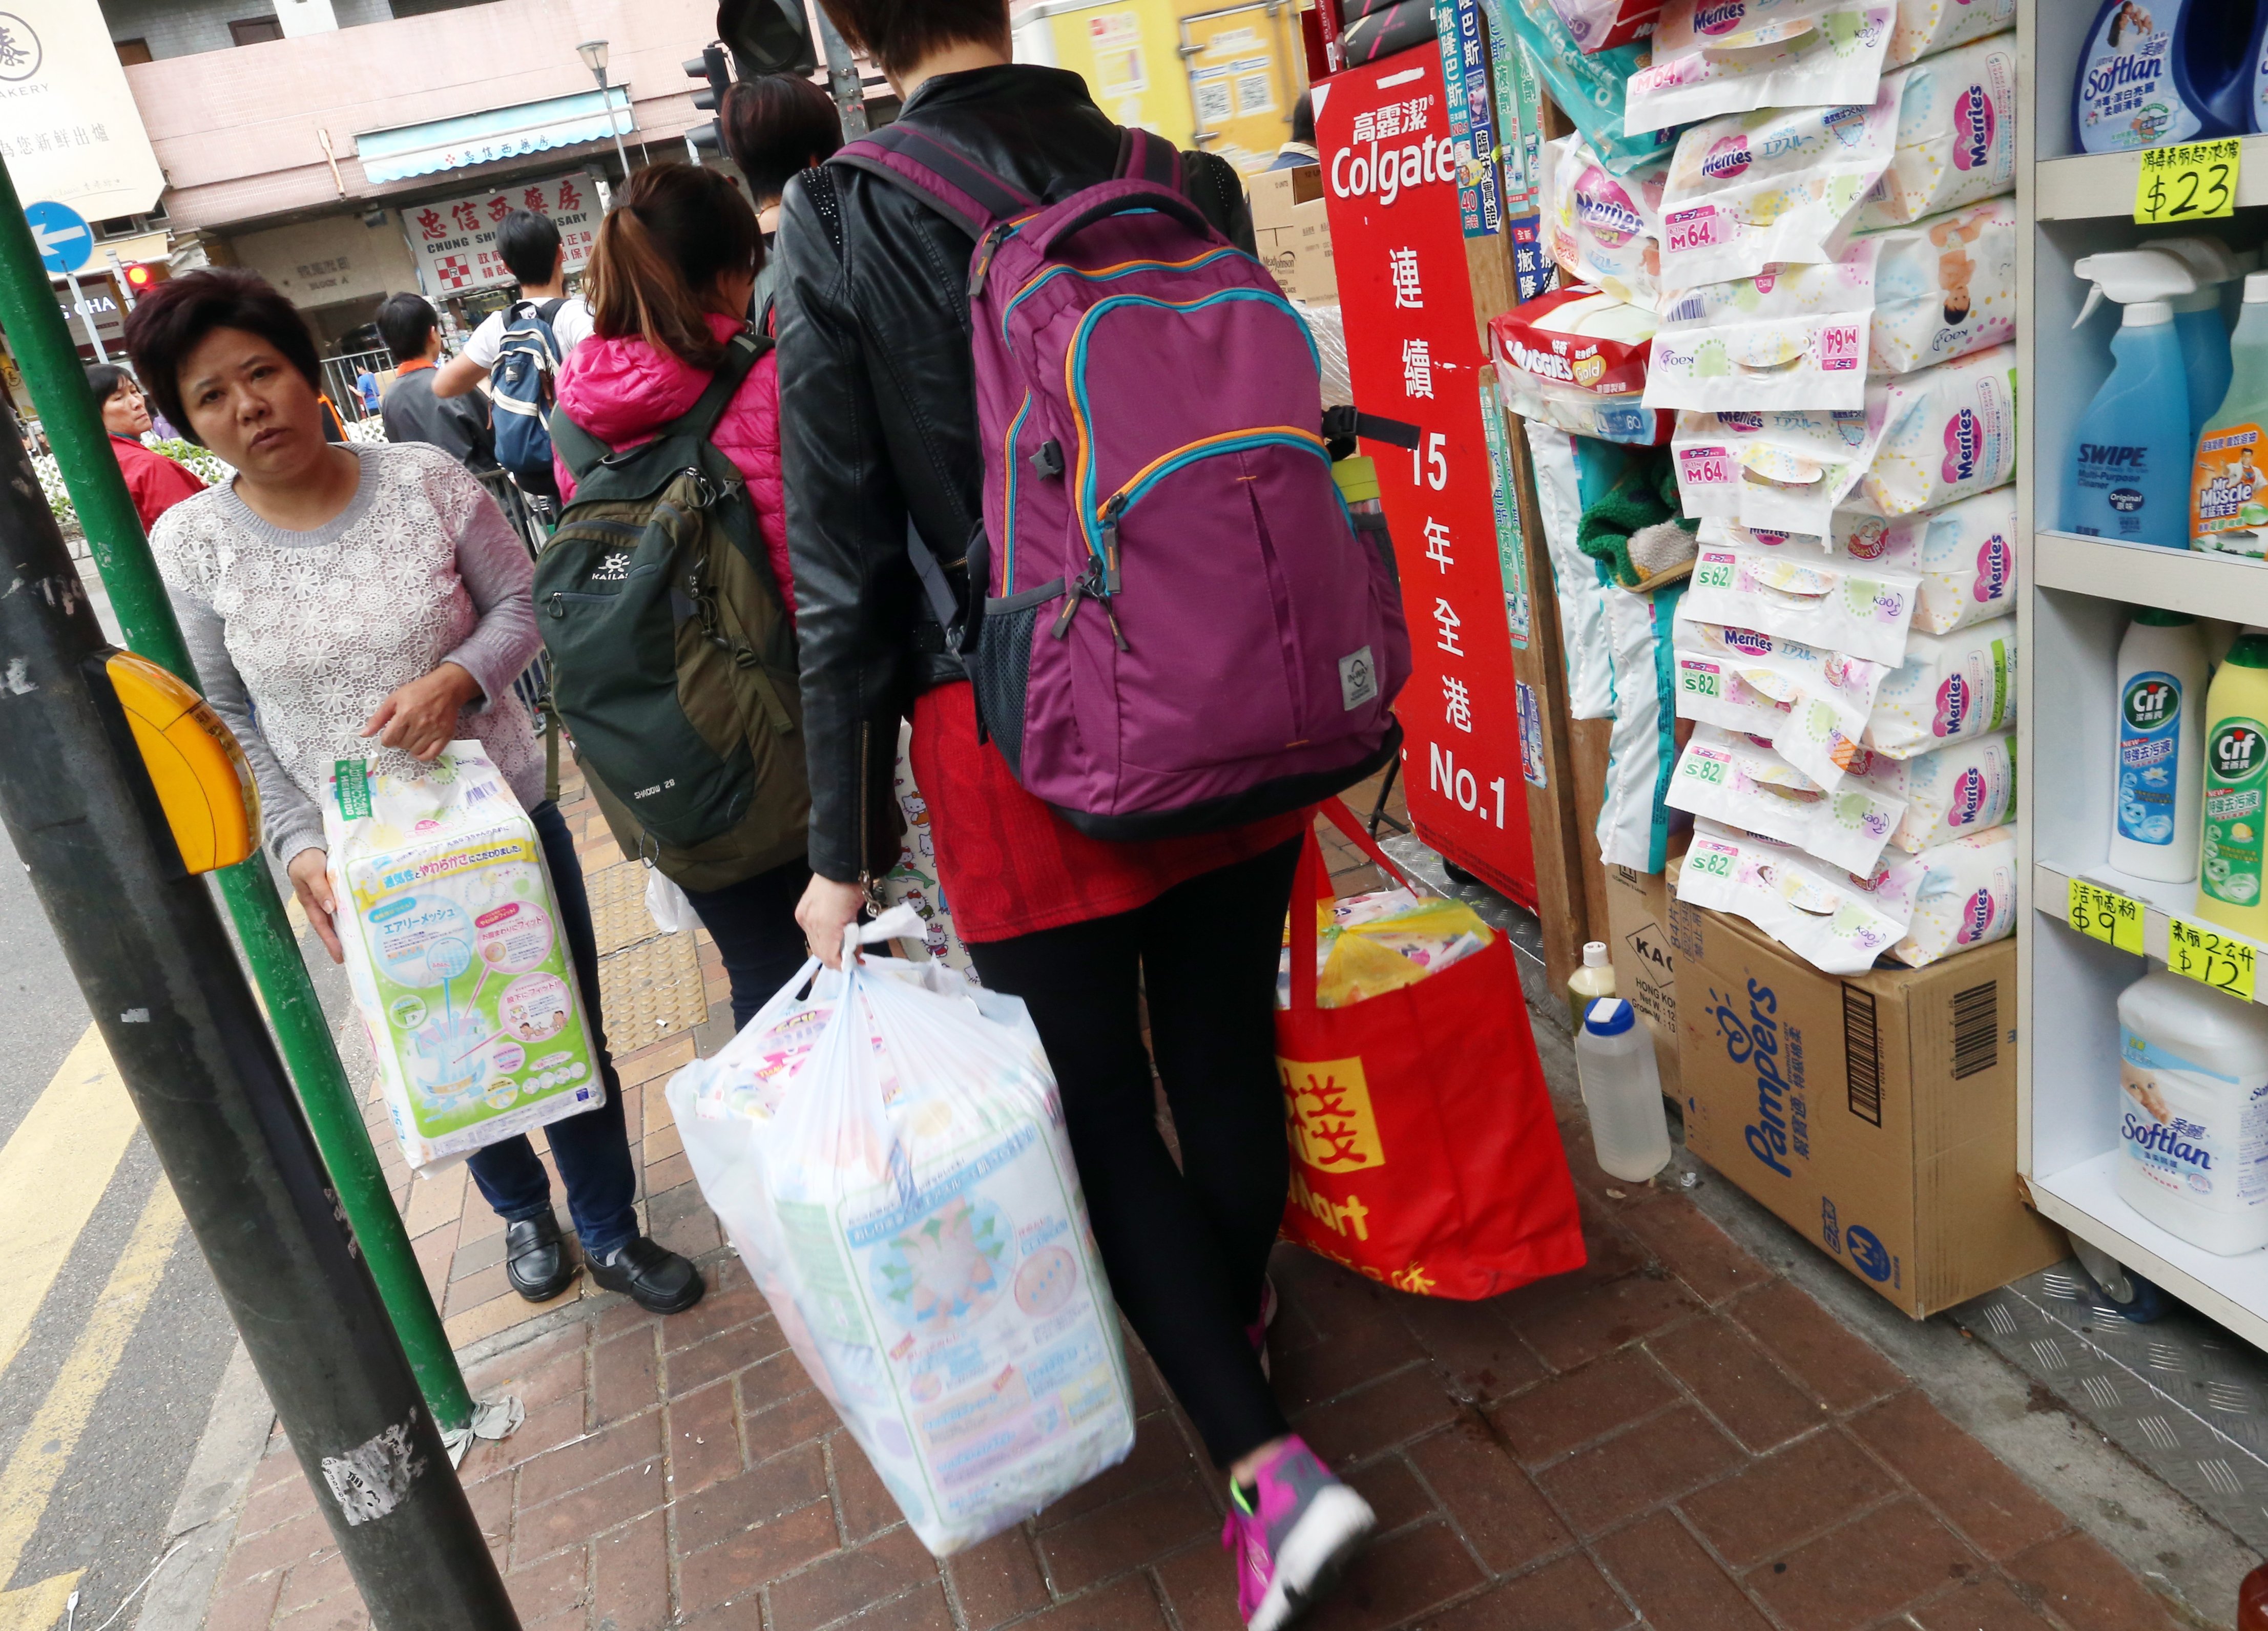 The incident took place in March in Tuen Mun, a popular place for shoppers from the mainland. Photo: K.Y. Cheng